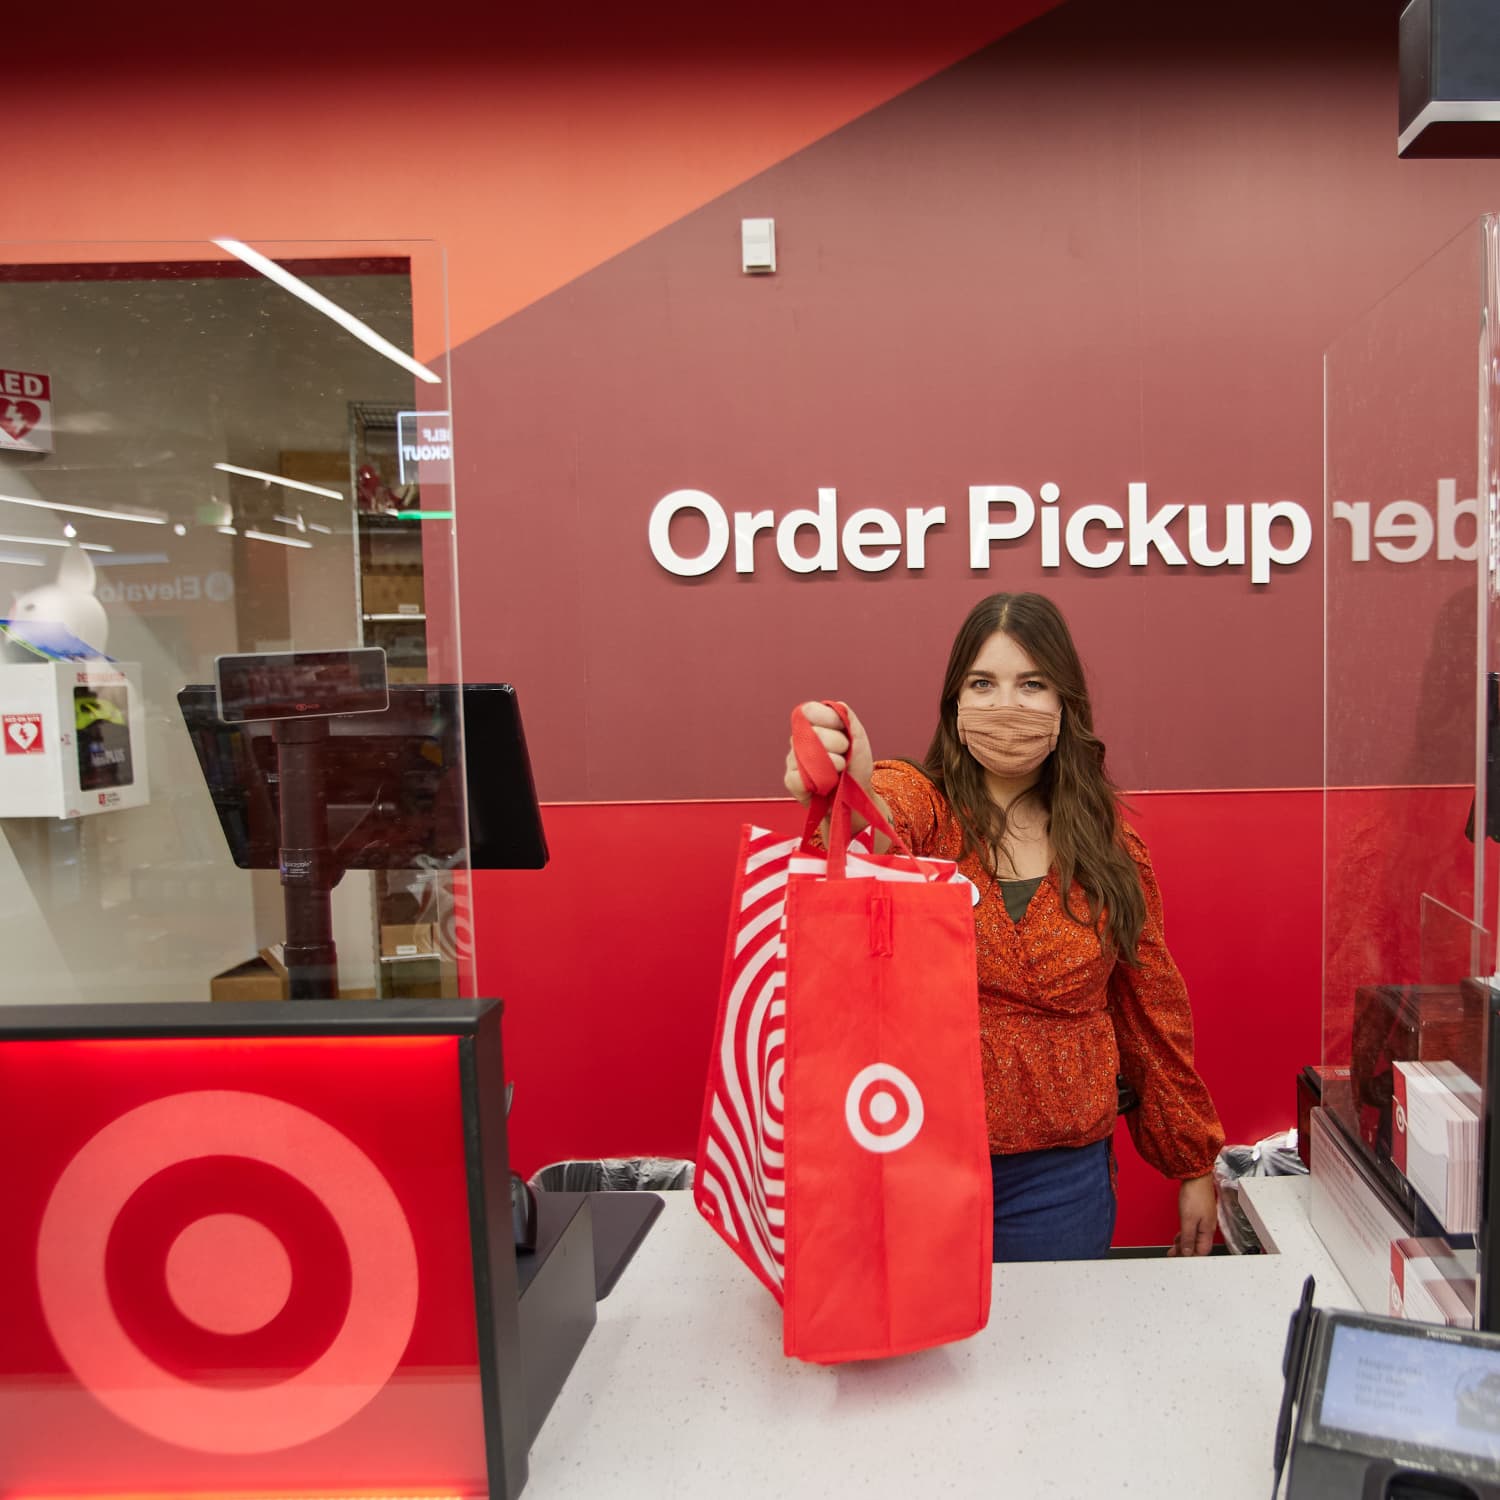 Target Just Launched Alcohol Delivery and Pickup